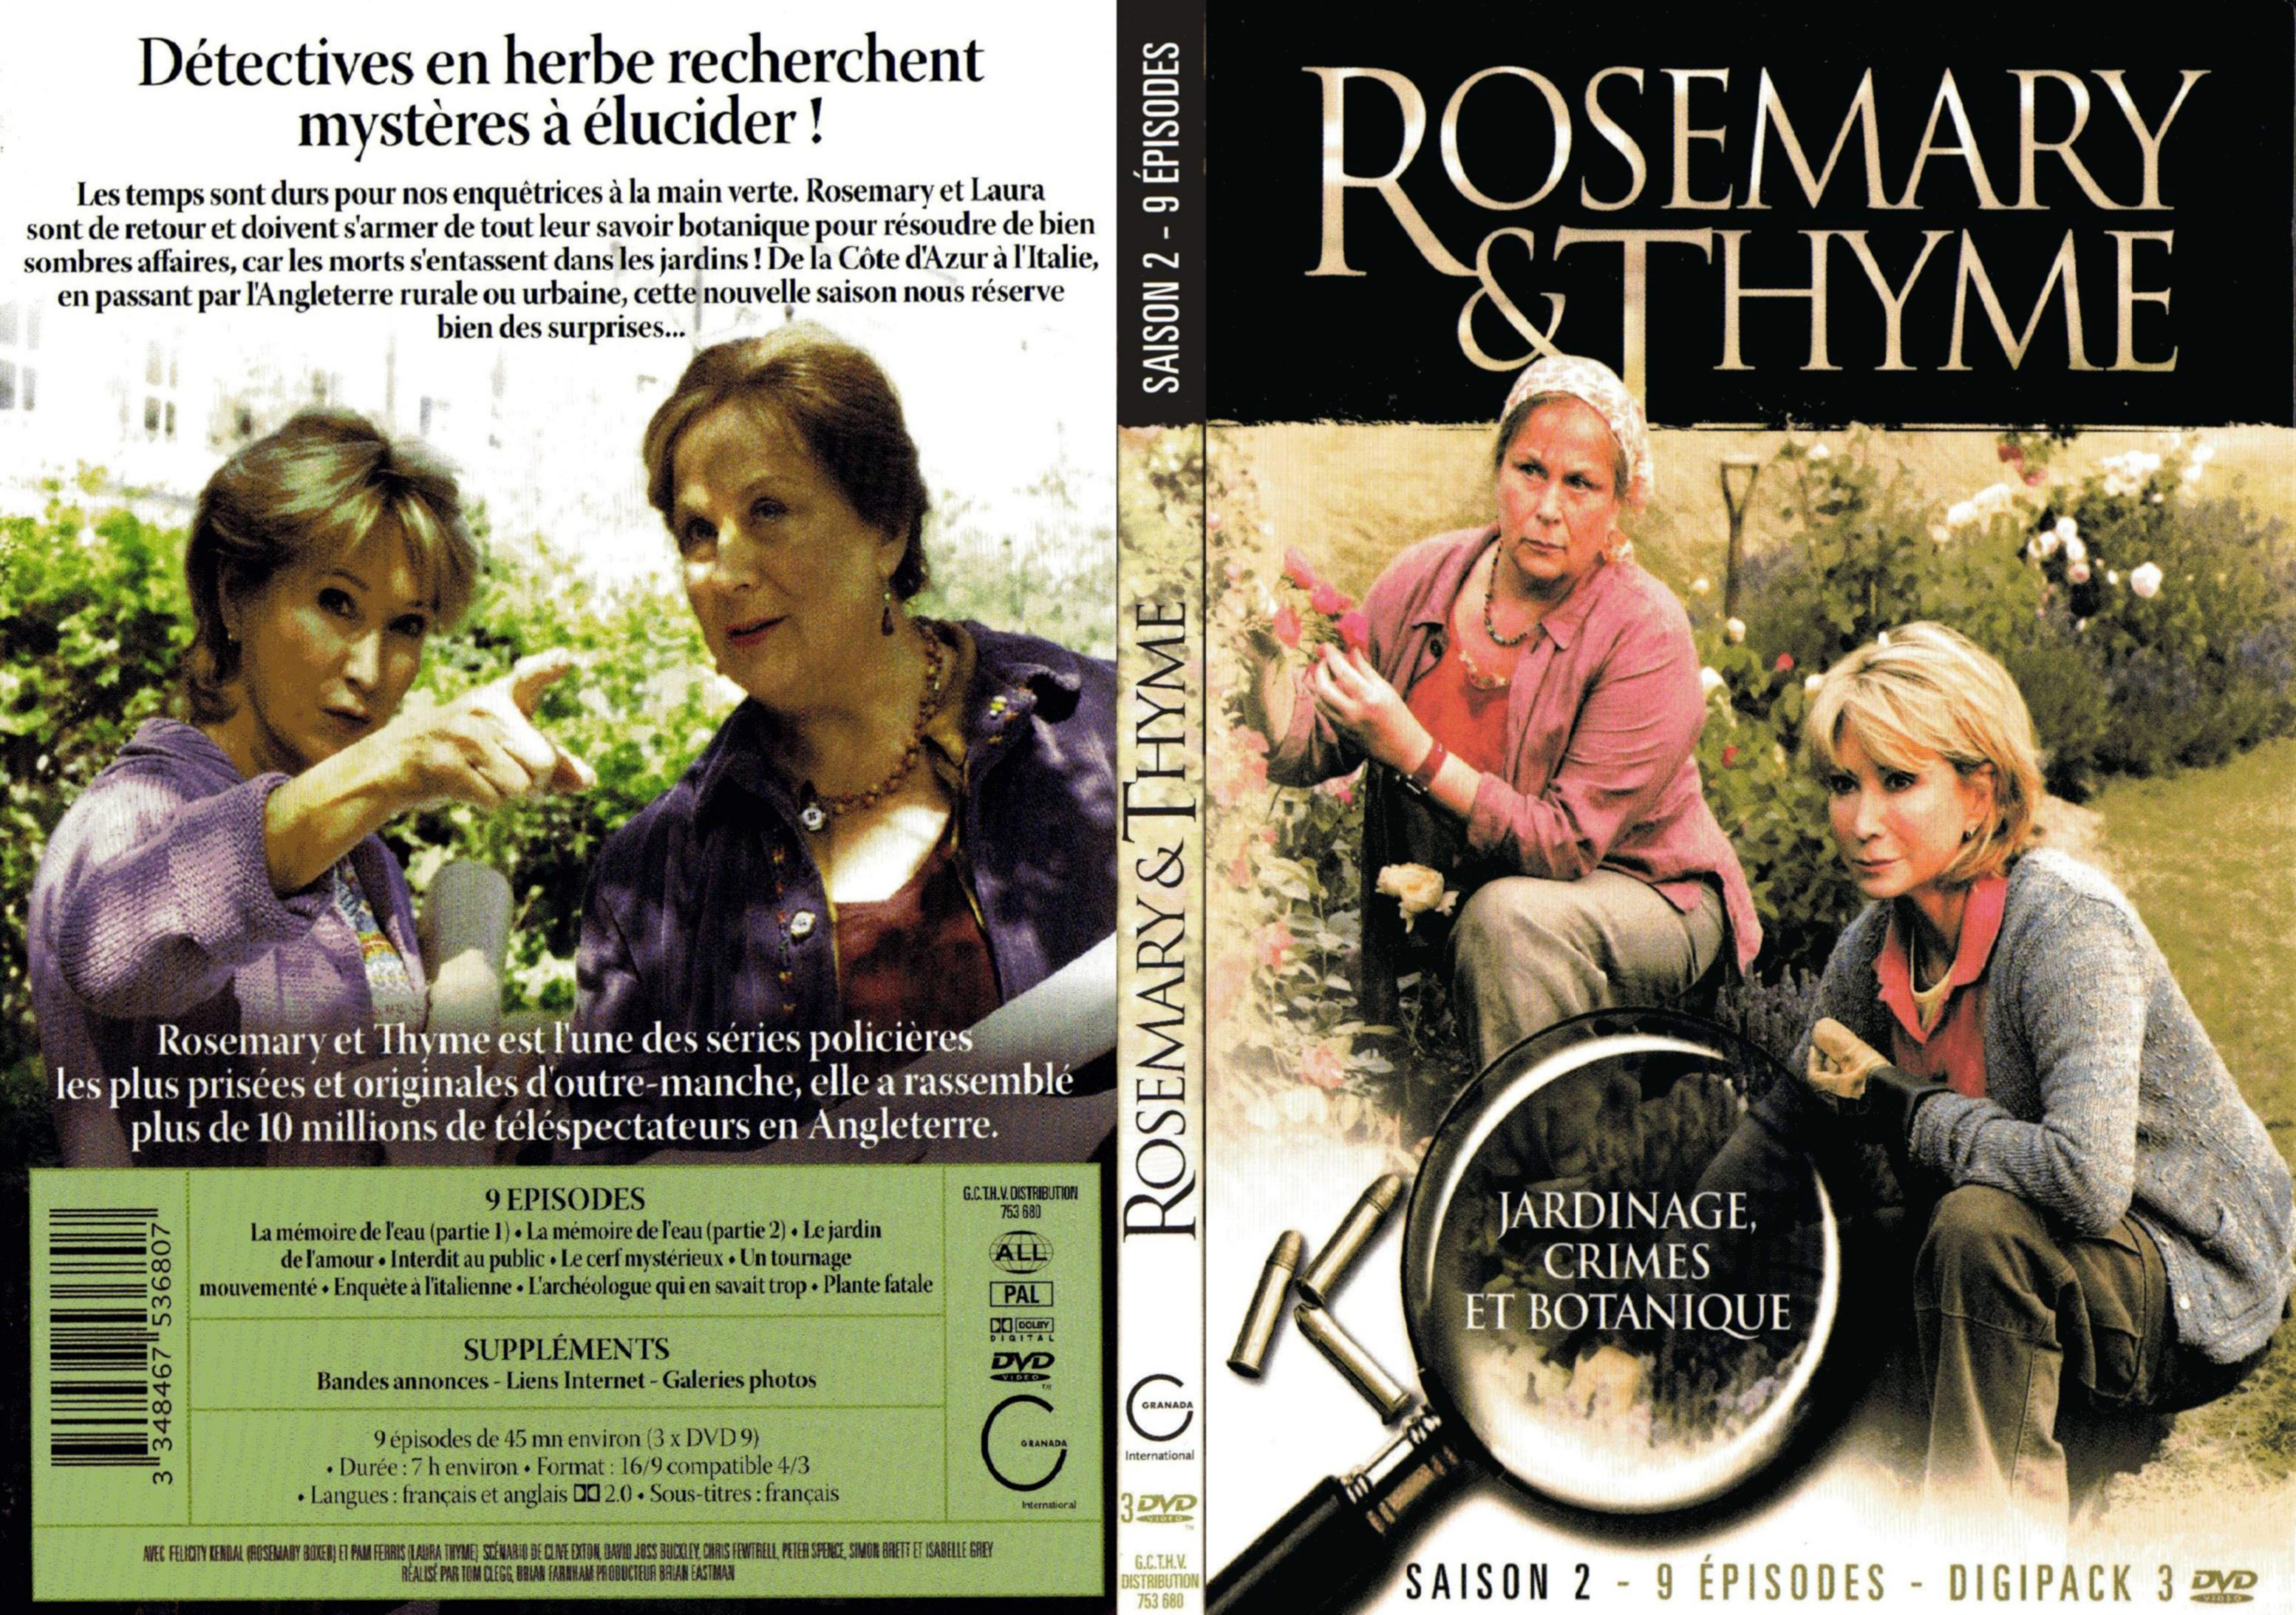 Jaquette DVD Rosemary & Thyme Saison 2